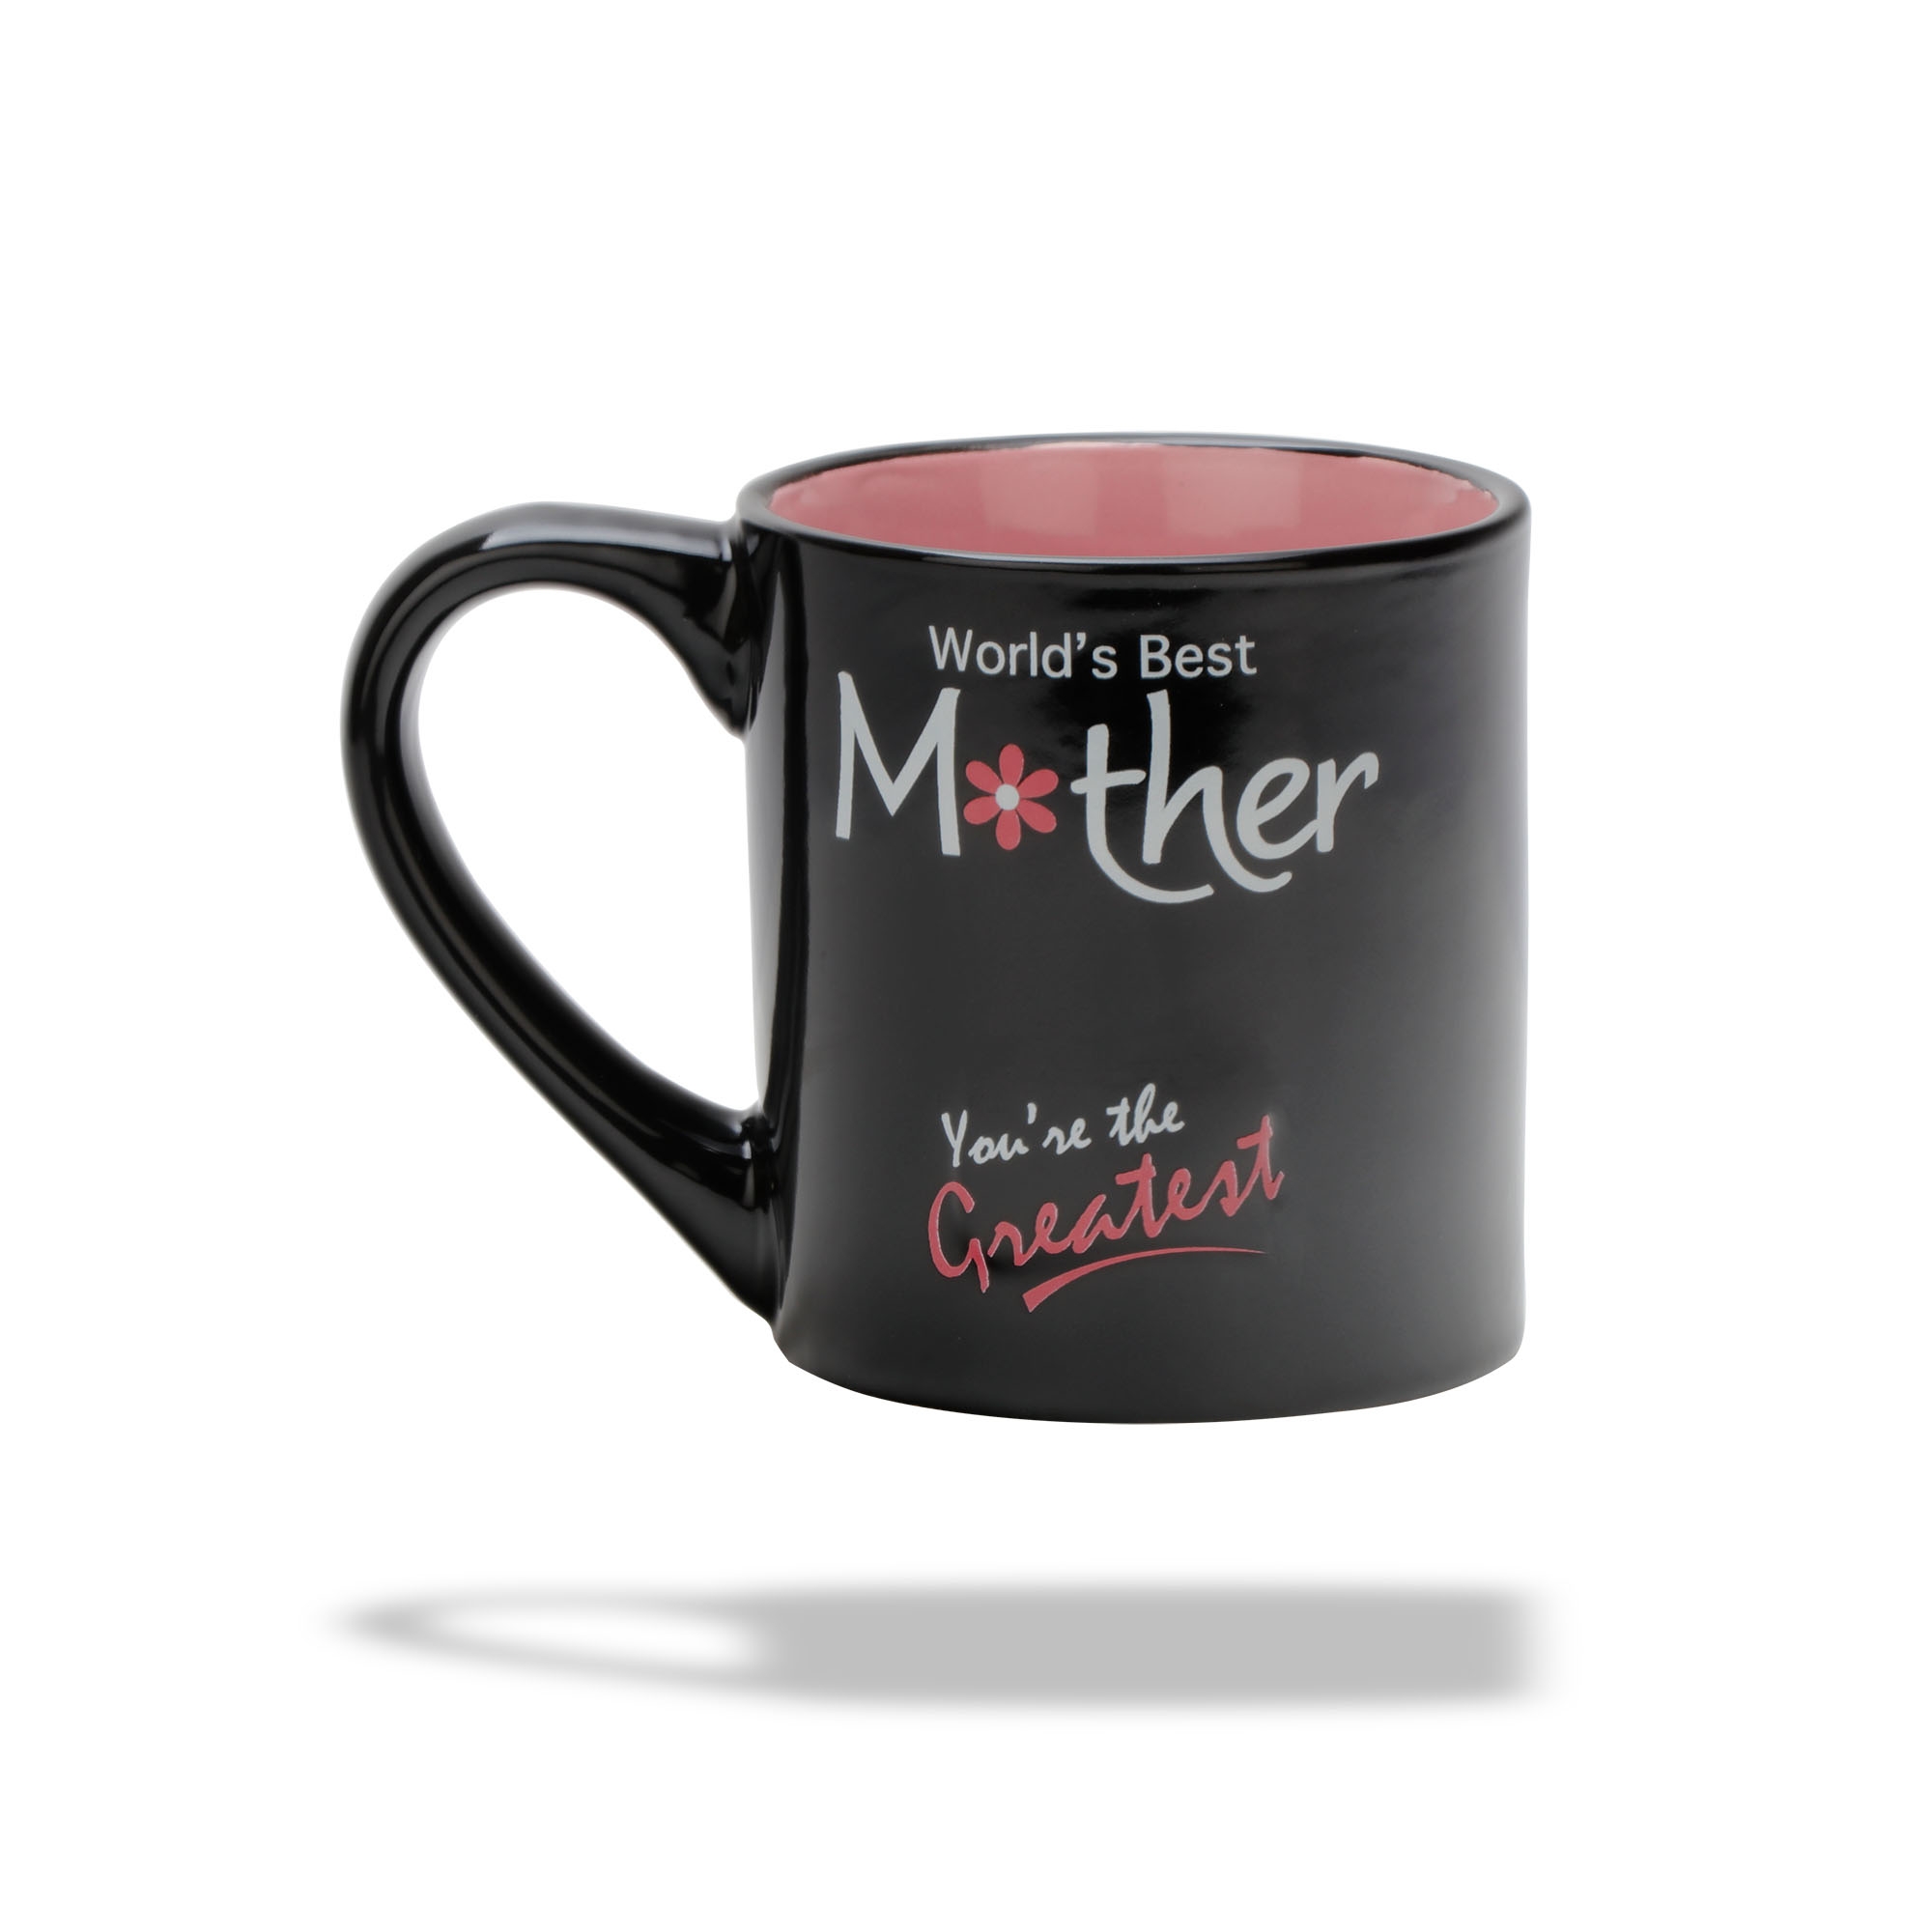 Archies | ARCHIES CERAMIC COFFEE MUG WITH WORLD'S BEST MOTHER PRINTED  0